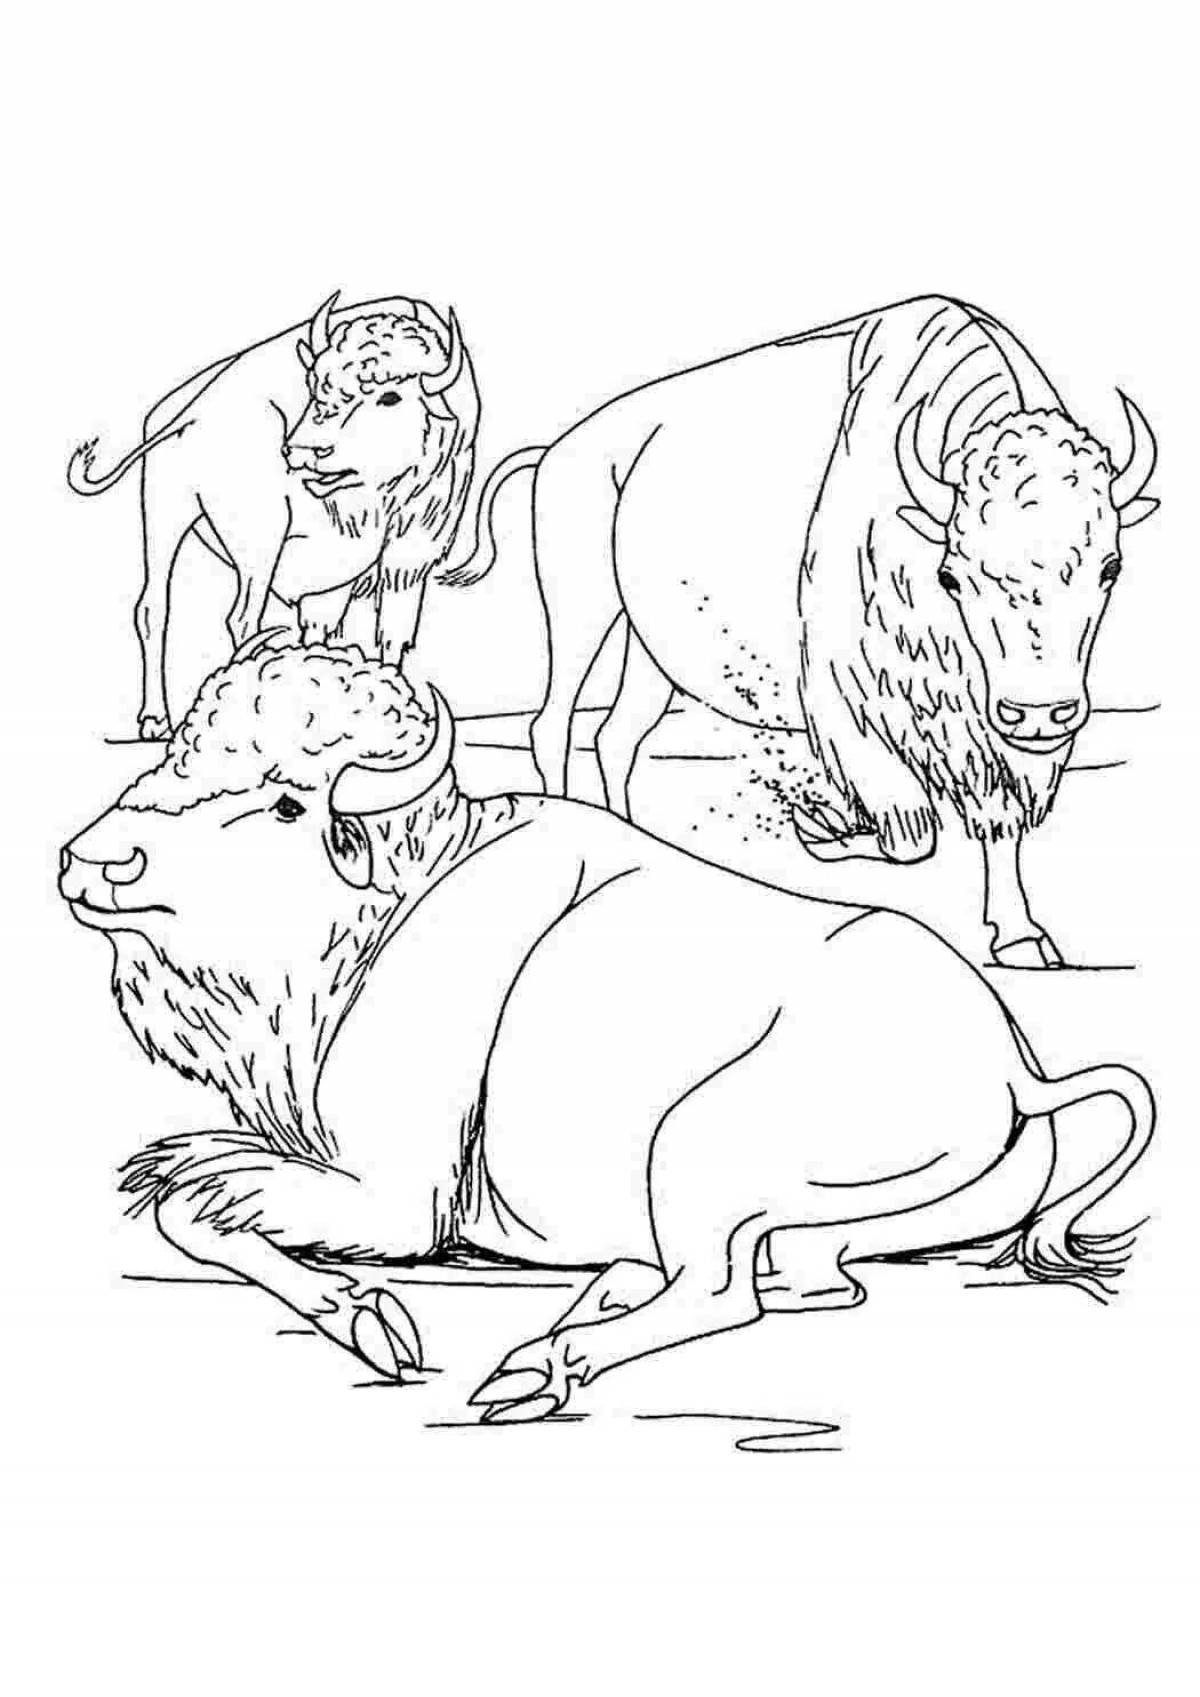 Coloring book shiny bison figurine